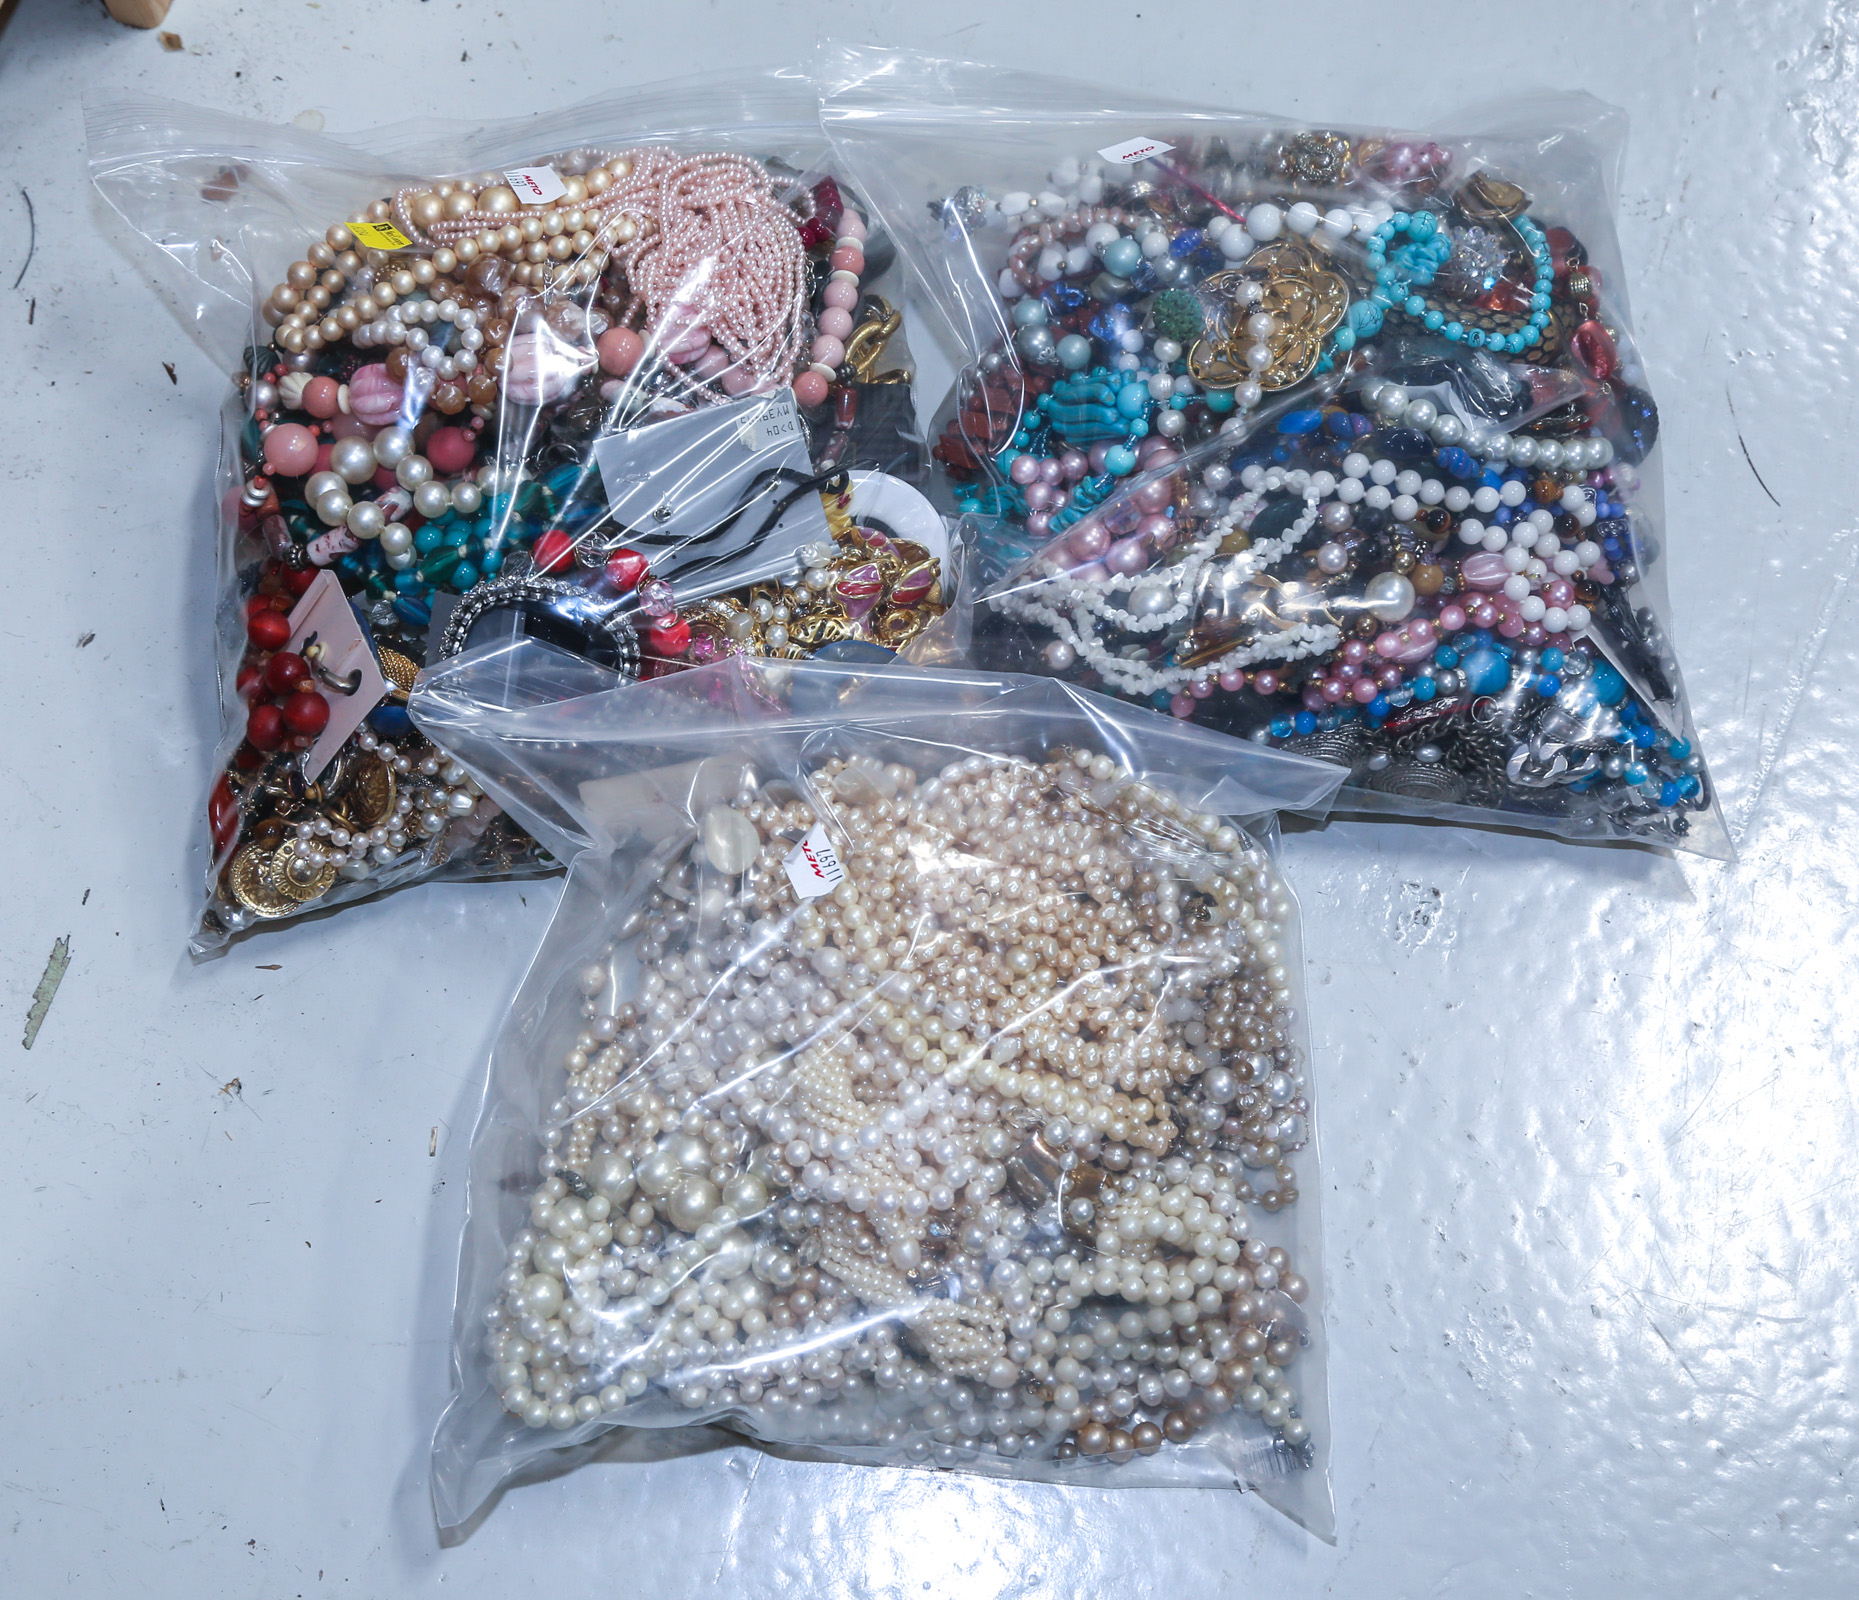 THREE BAGS OF COSTUME JEWELRY Comprising